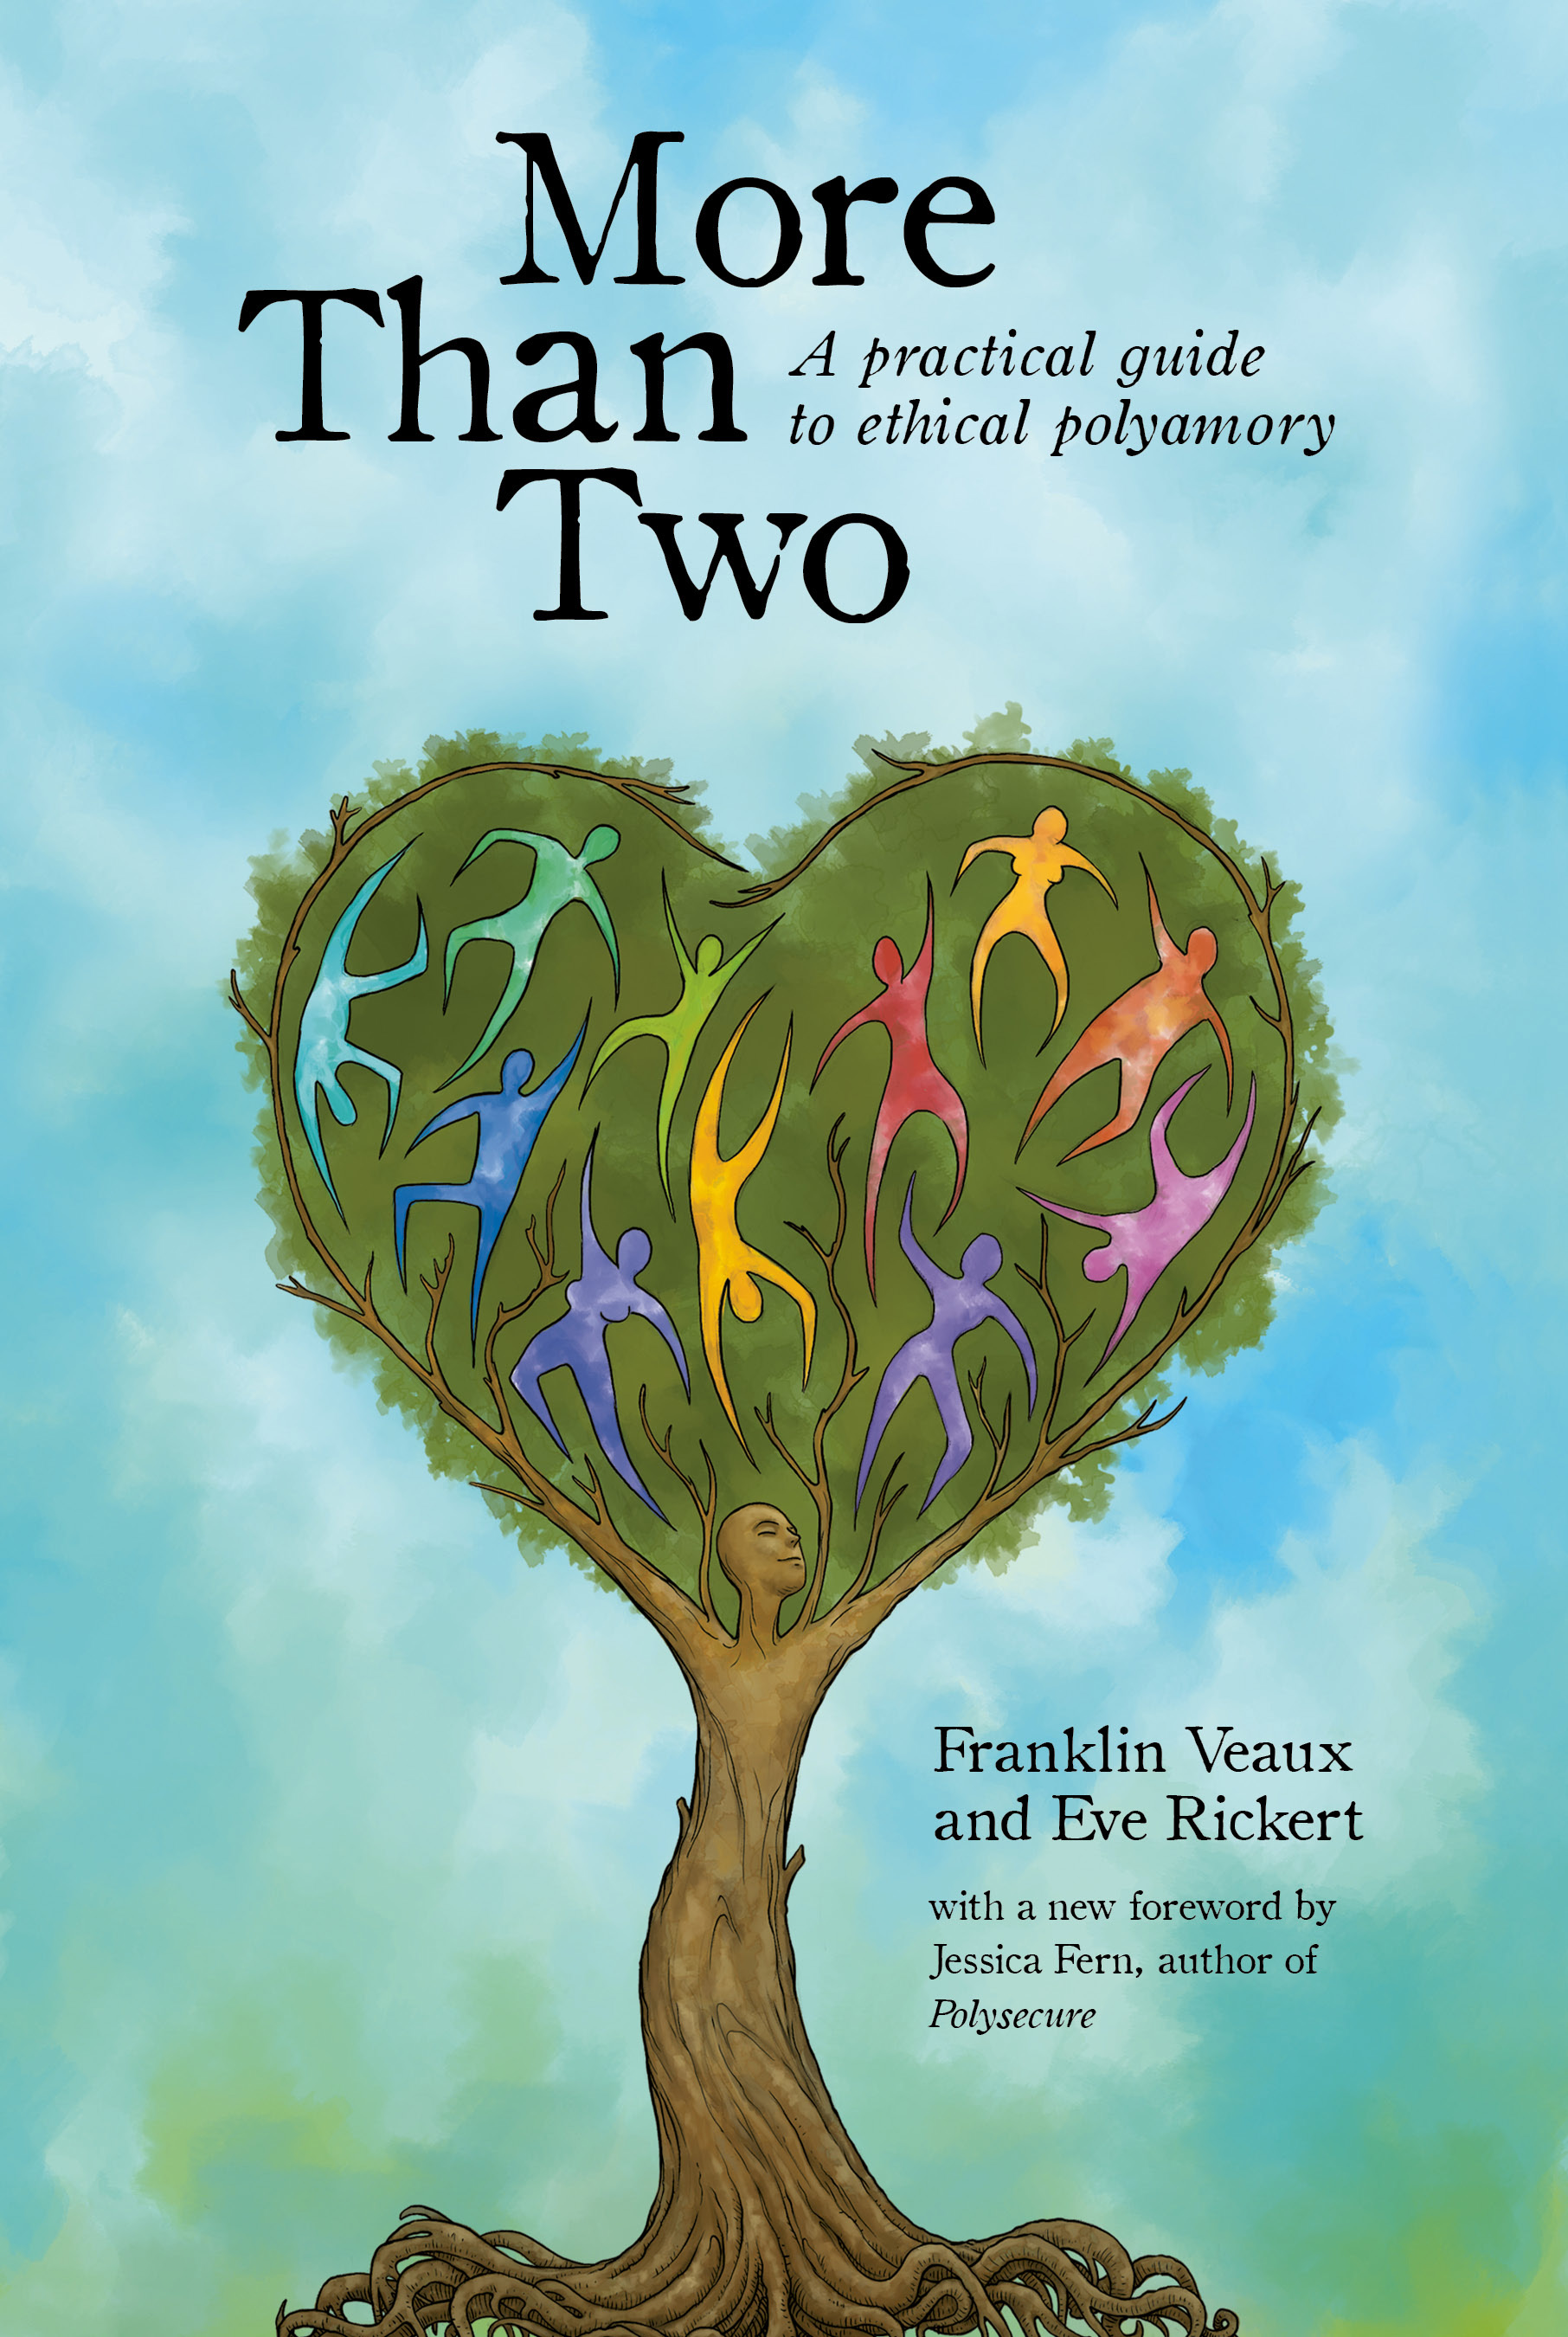 The front cover of the eighth printing of More Than Two